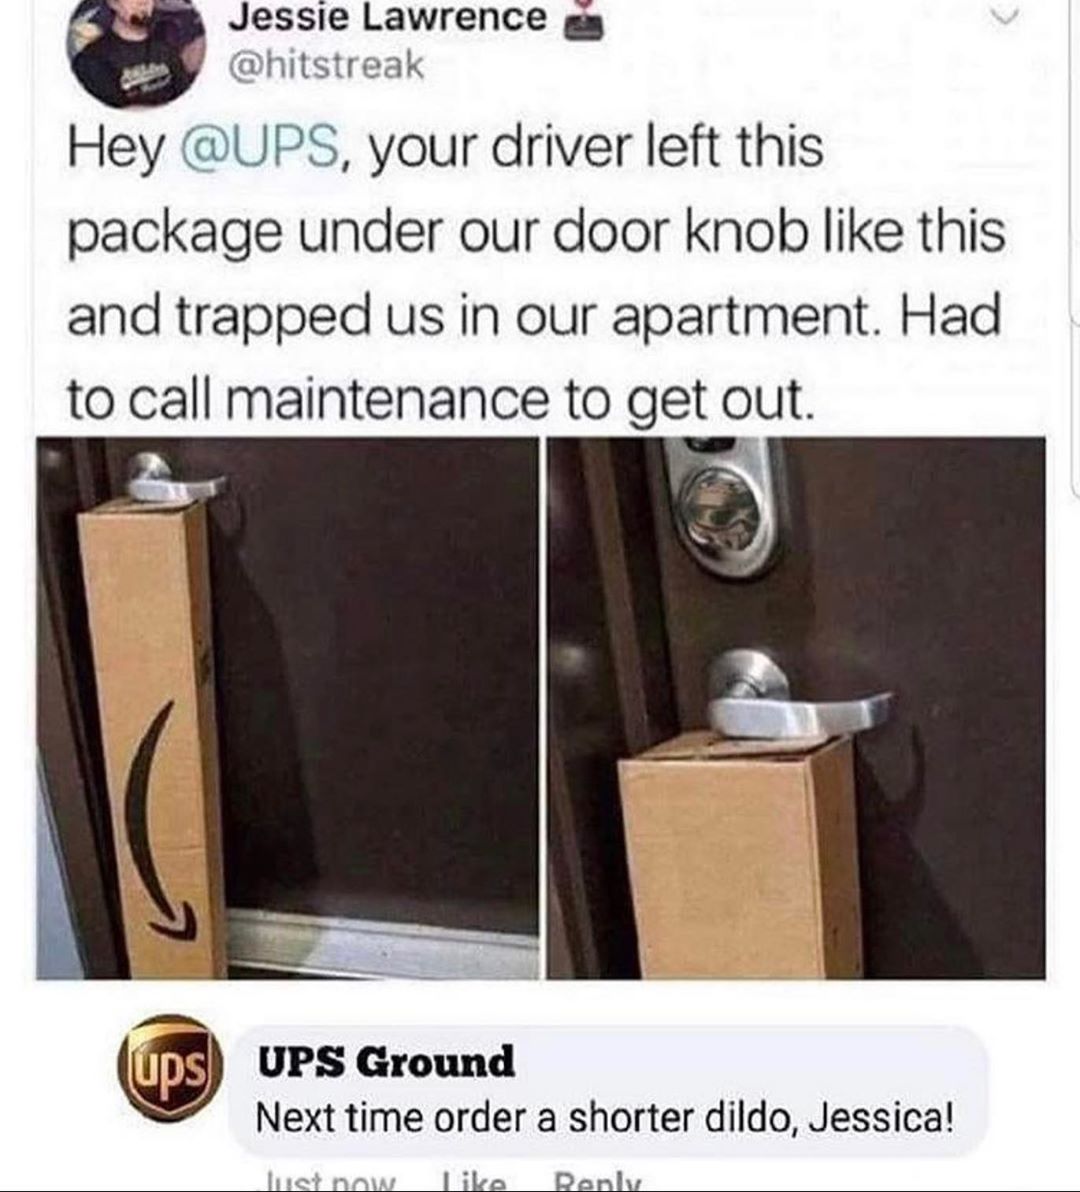 ups dildo meme - Jessie Lawrence Hey , your driver left this package under our door knob this and trapped us in our apartment. Had to call maintenance to get out. ups Ups Ground Next time order a shorter dildo, Jessica! Inst now Renly